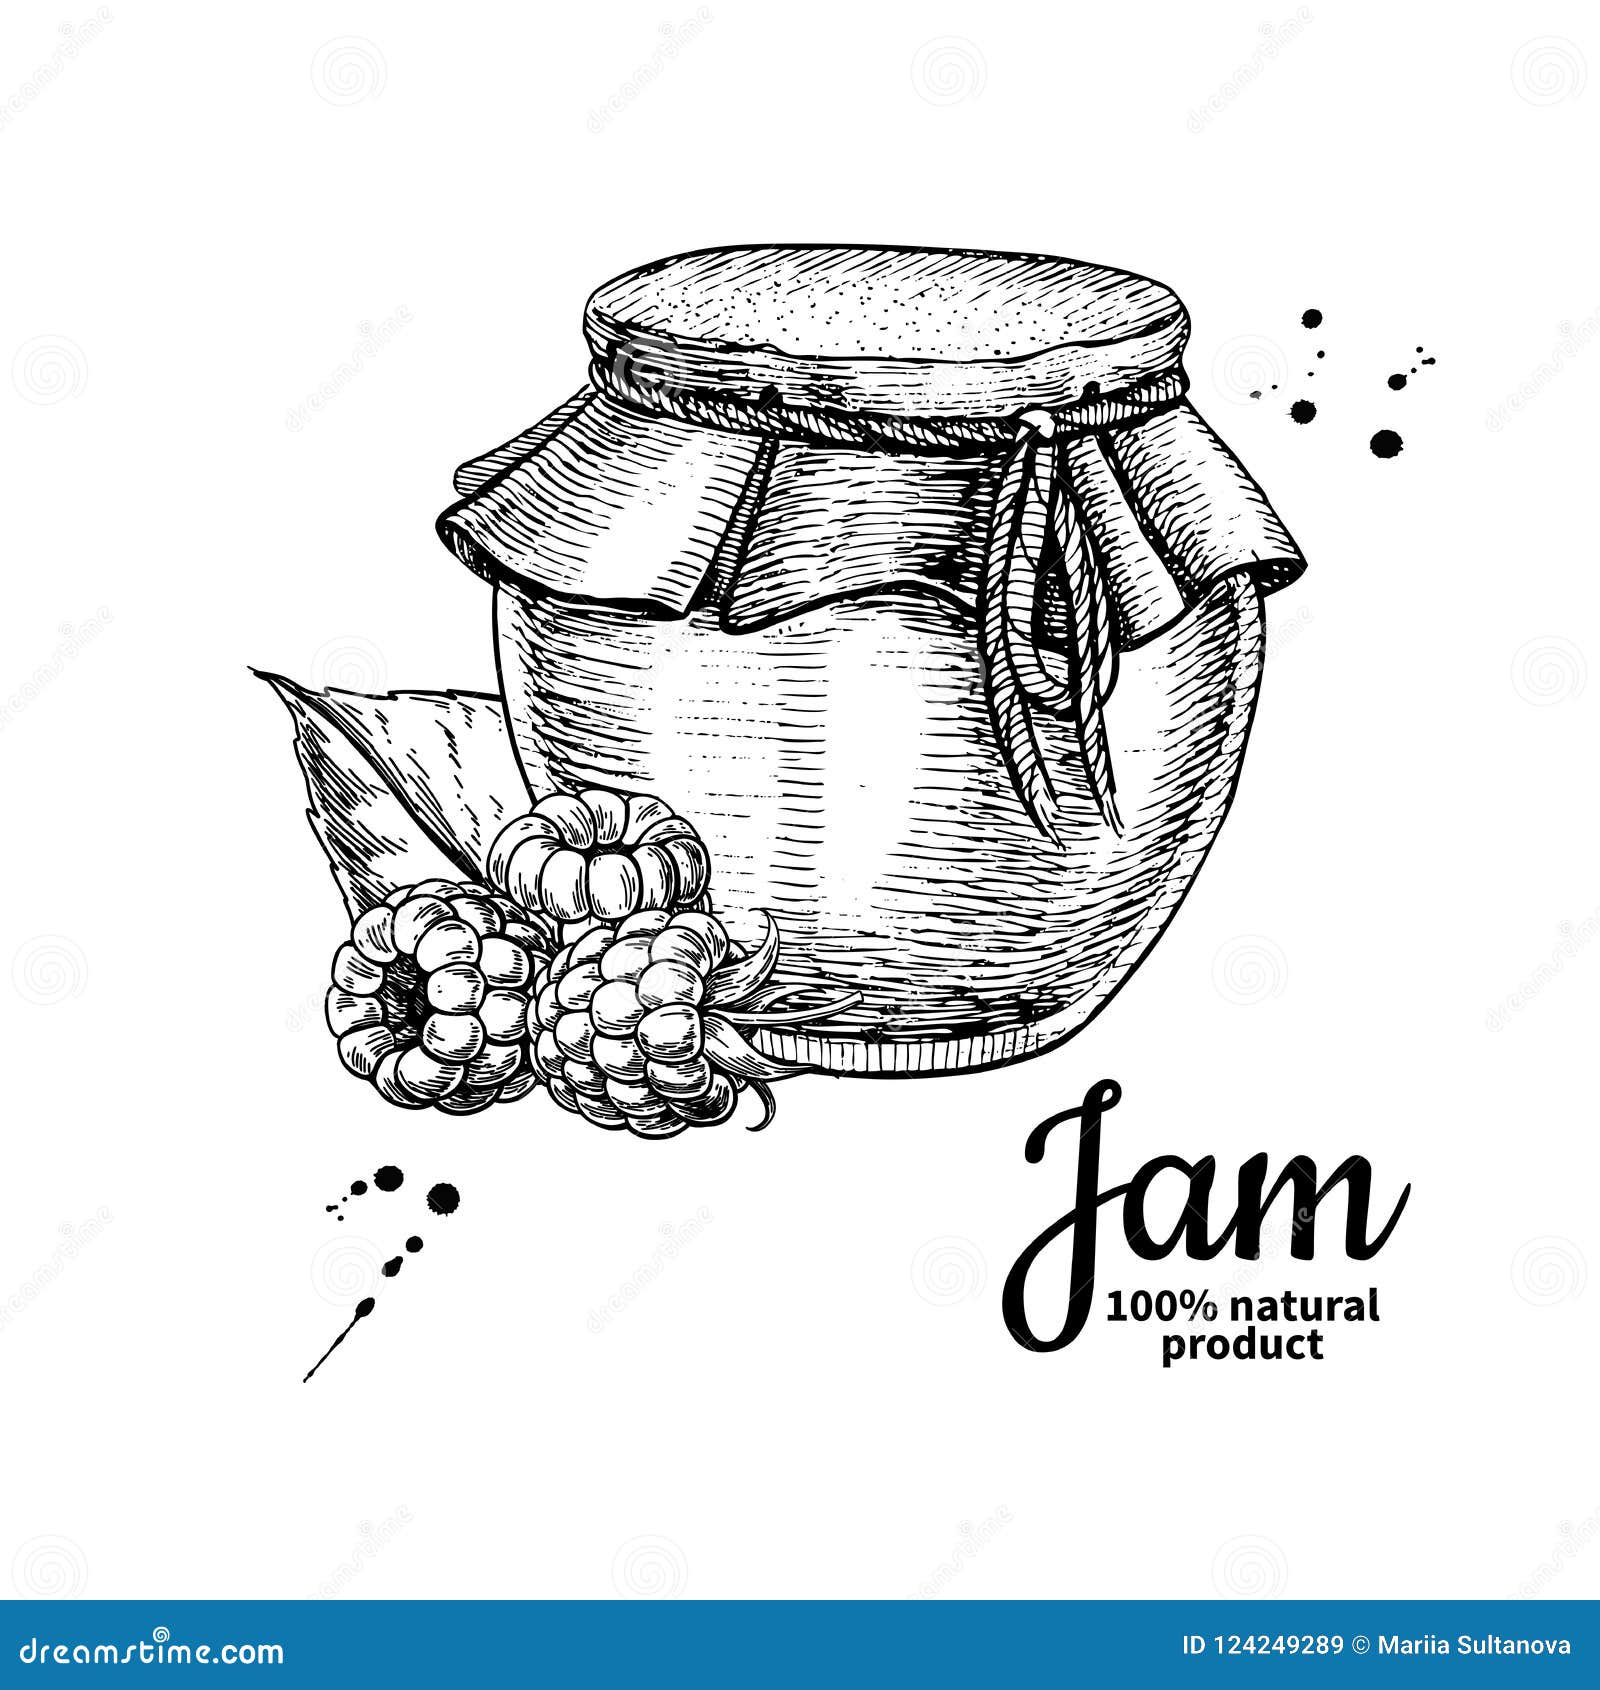 How to Draw a Jam  Easy Drawing Tutorial For Kids